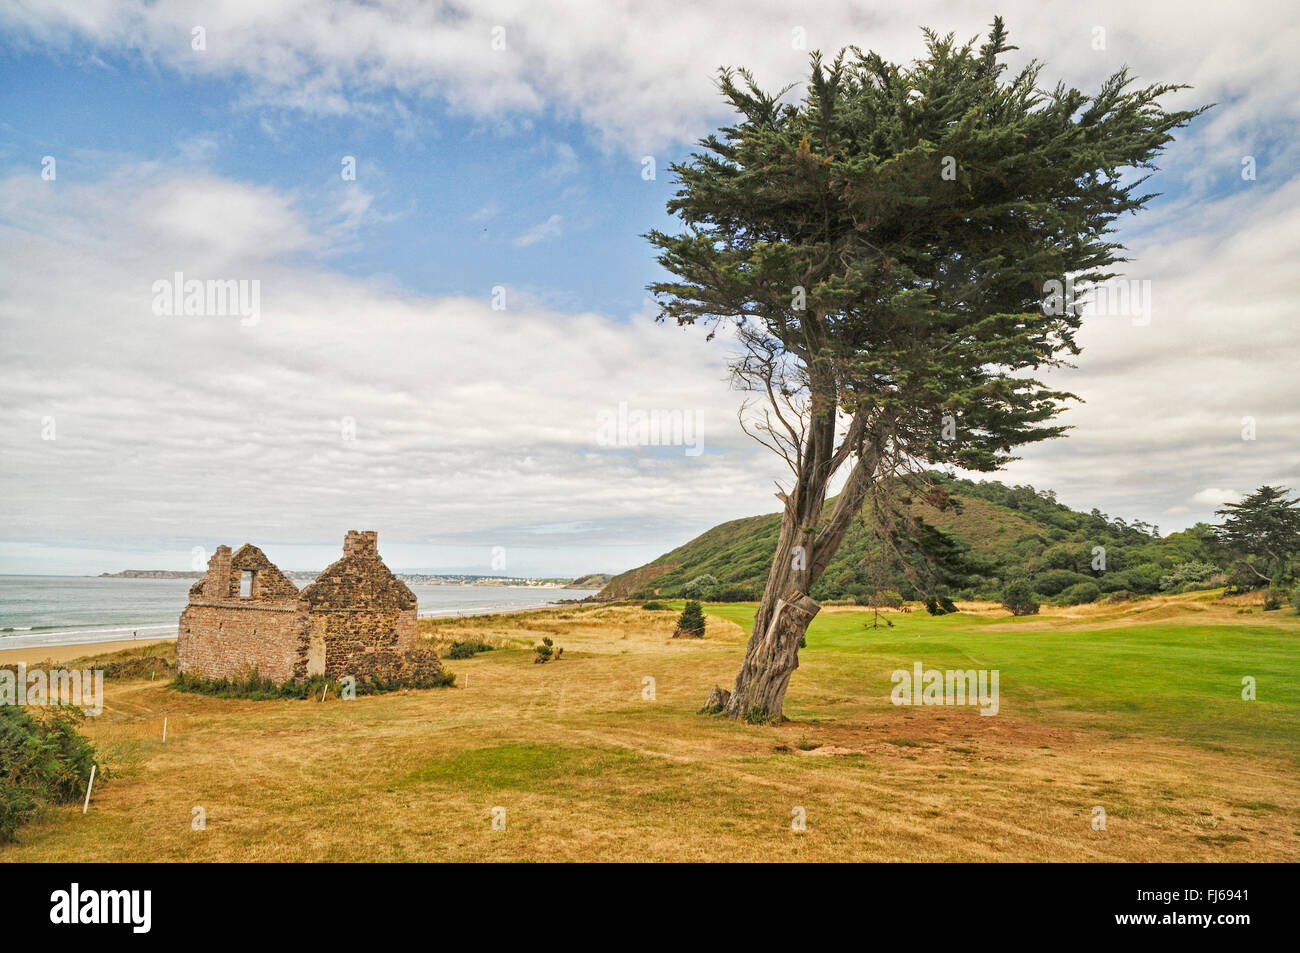 cypress (Cupressus spec.), old ruin and single tree on golf course near the beach, France, Brittany, D�partement C�tes-d�Armor, Pl�neuf-Val-Andr� Stock Photo